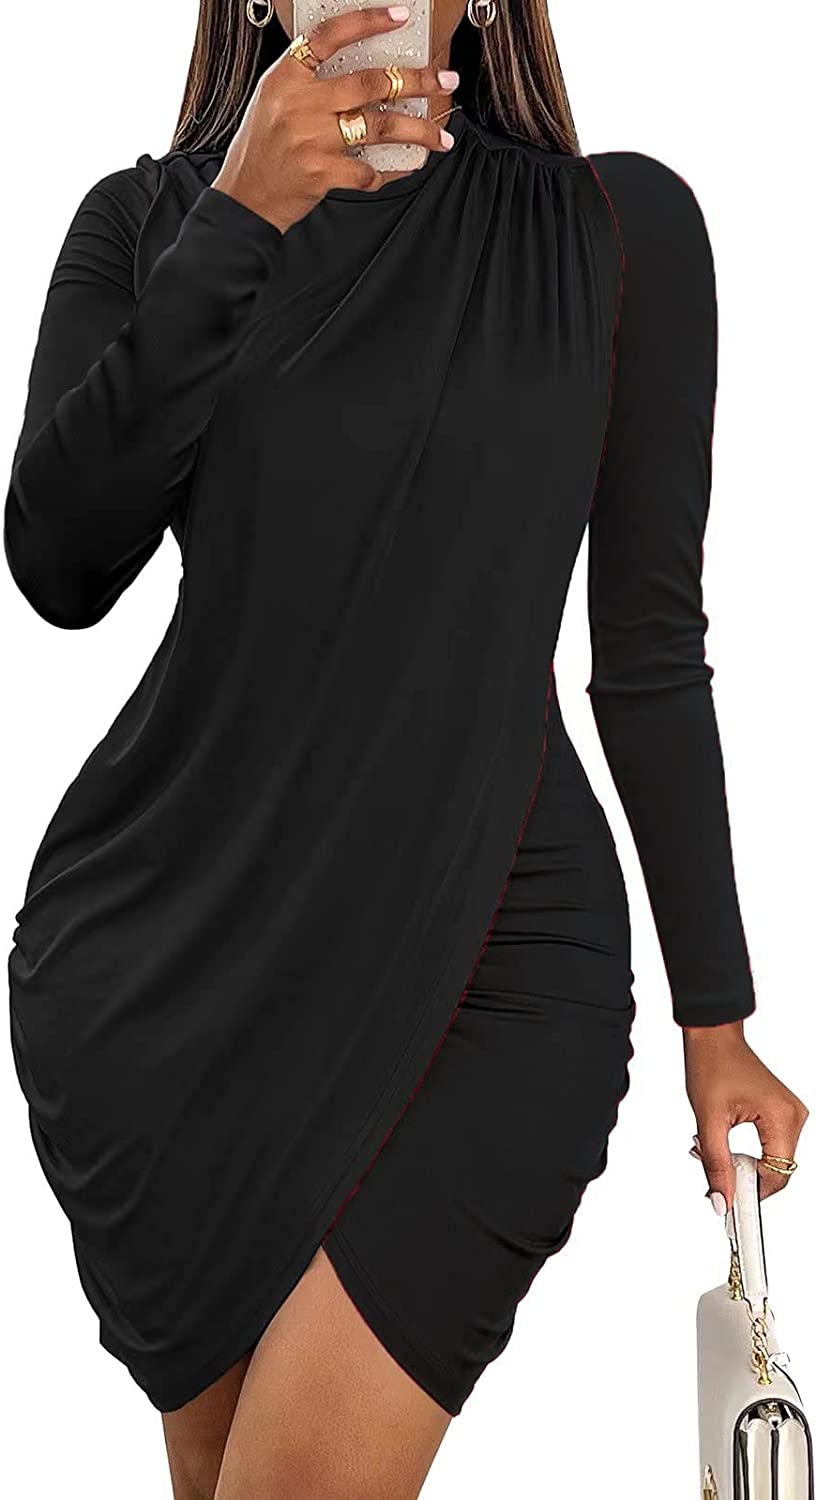 yilisaxi Women Short Sleeve Solid Color Bodycon Tight Ruched Wrap T Shirt  Mini S | eBay